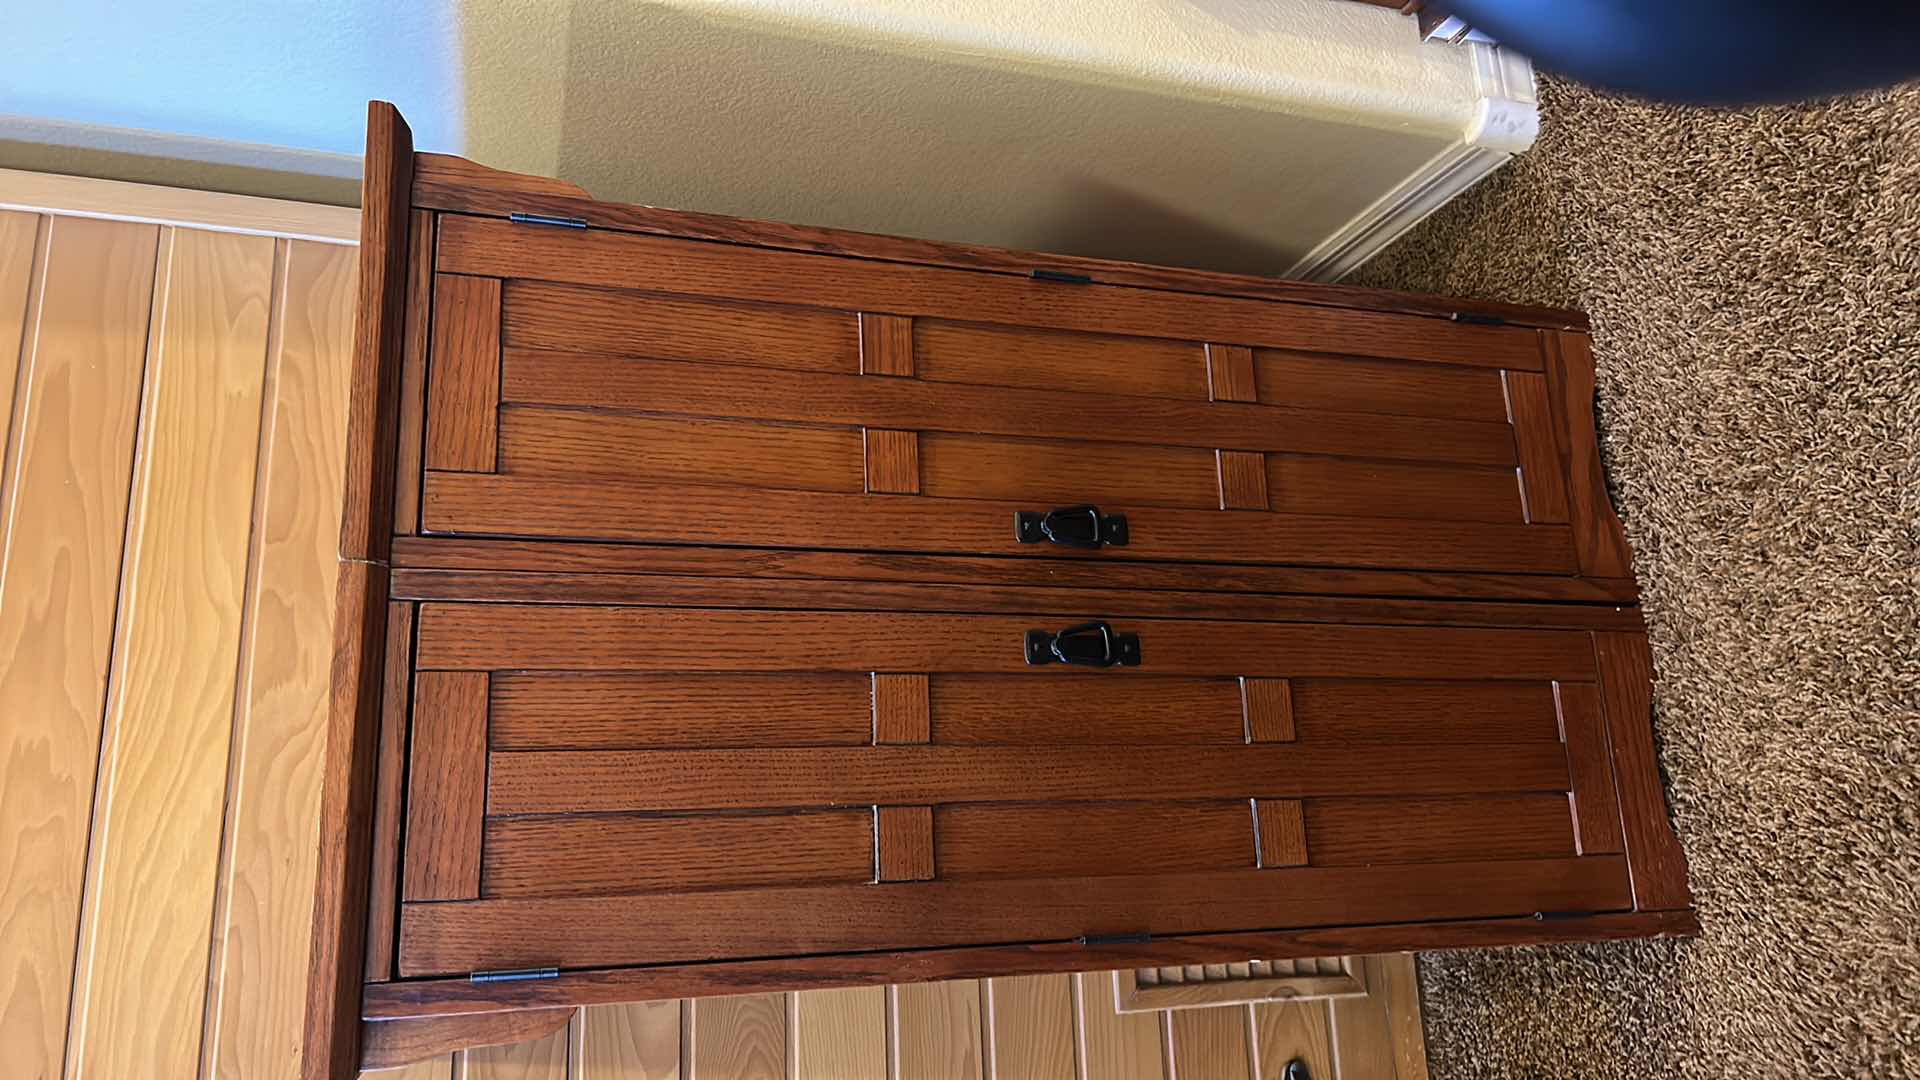 Photo 4 of 2 SIDE BY SIDE WOOD CABINETS W CONTENTS 
20 25 1/2“ x 15“ x 41 1/2“